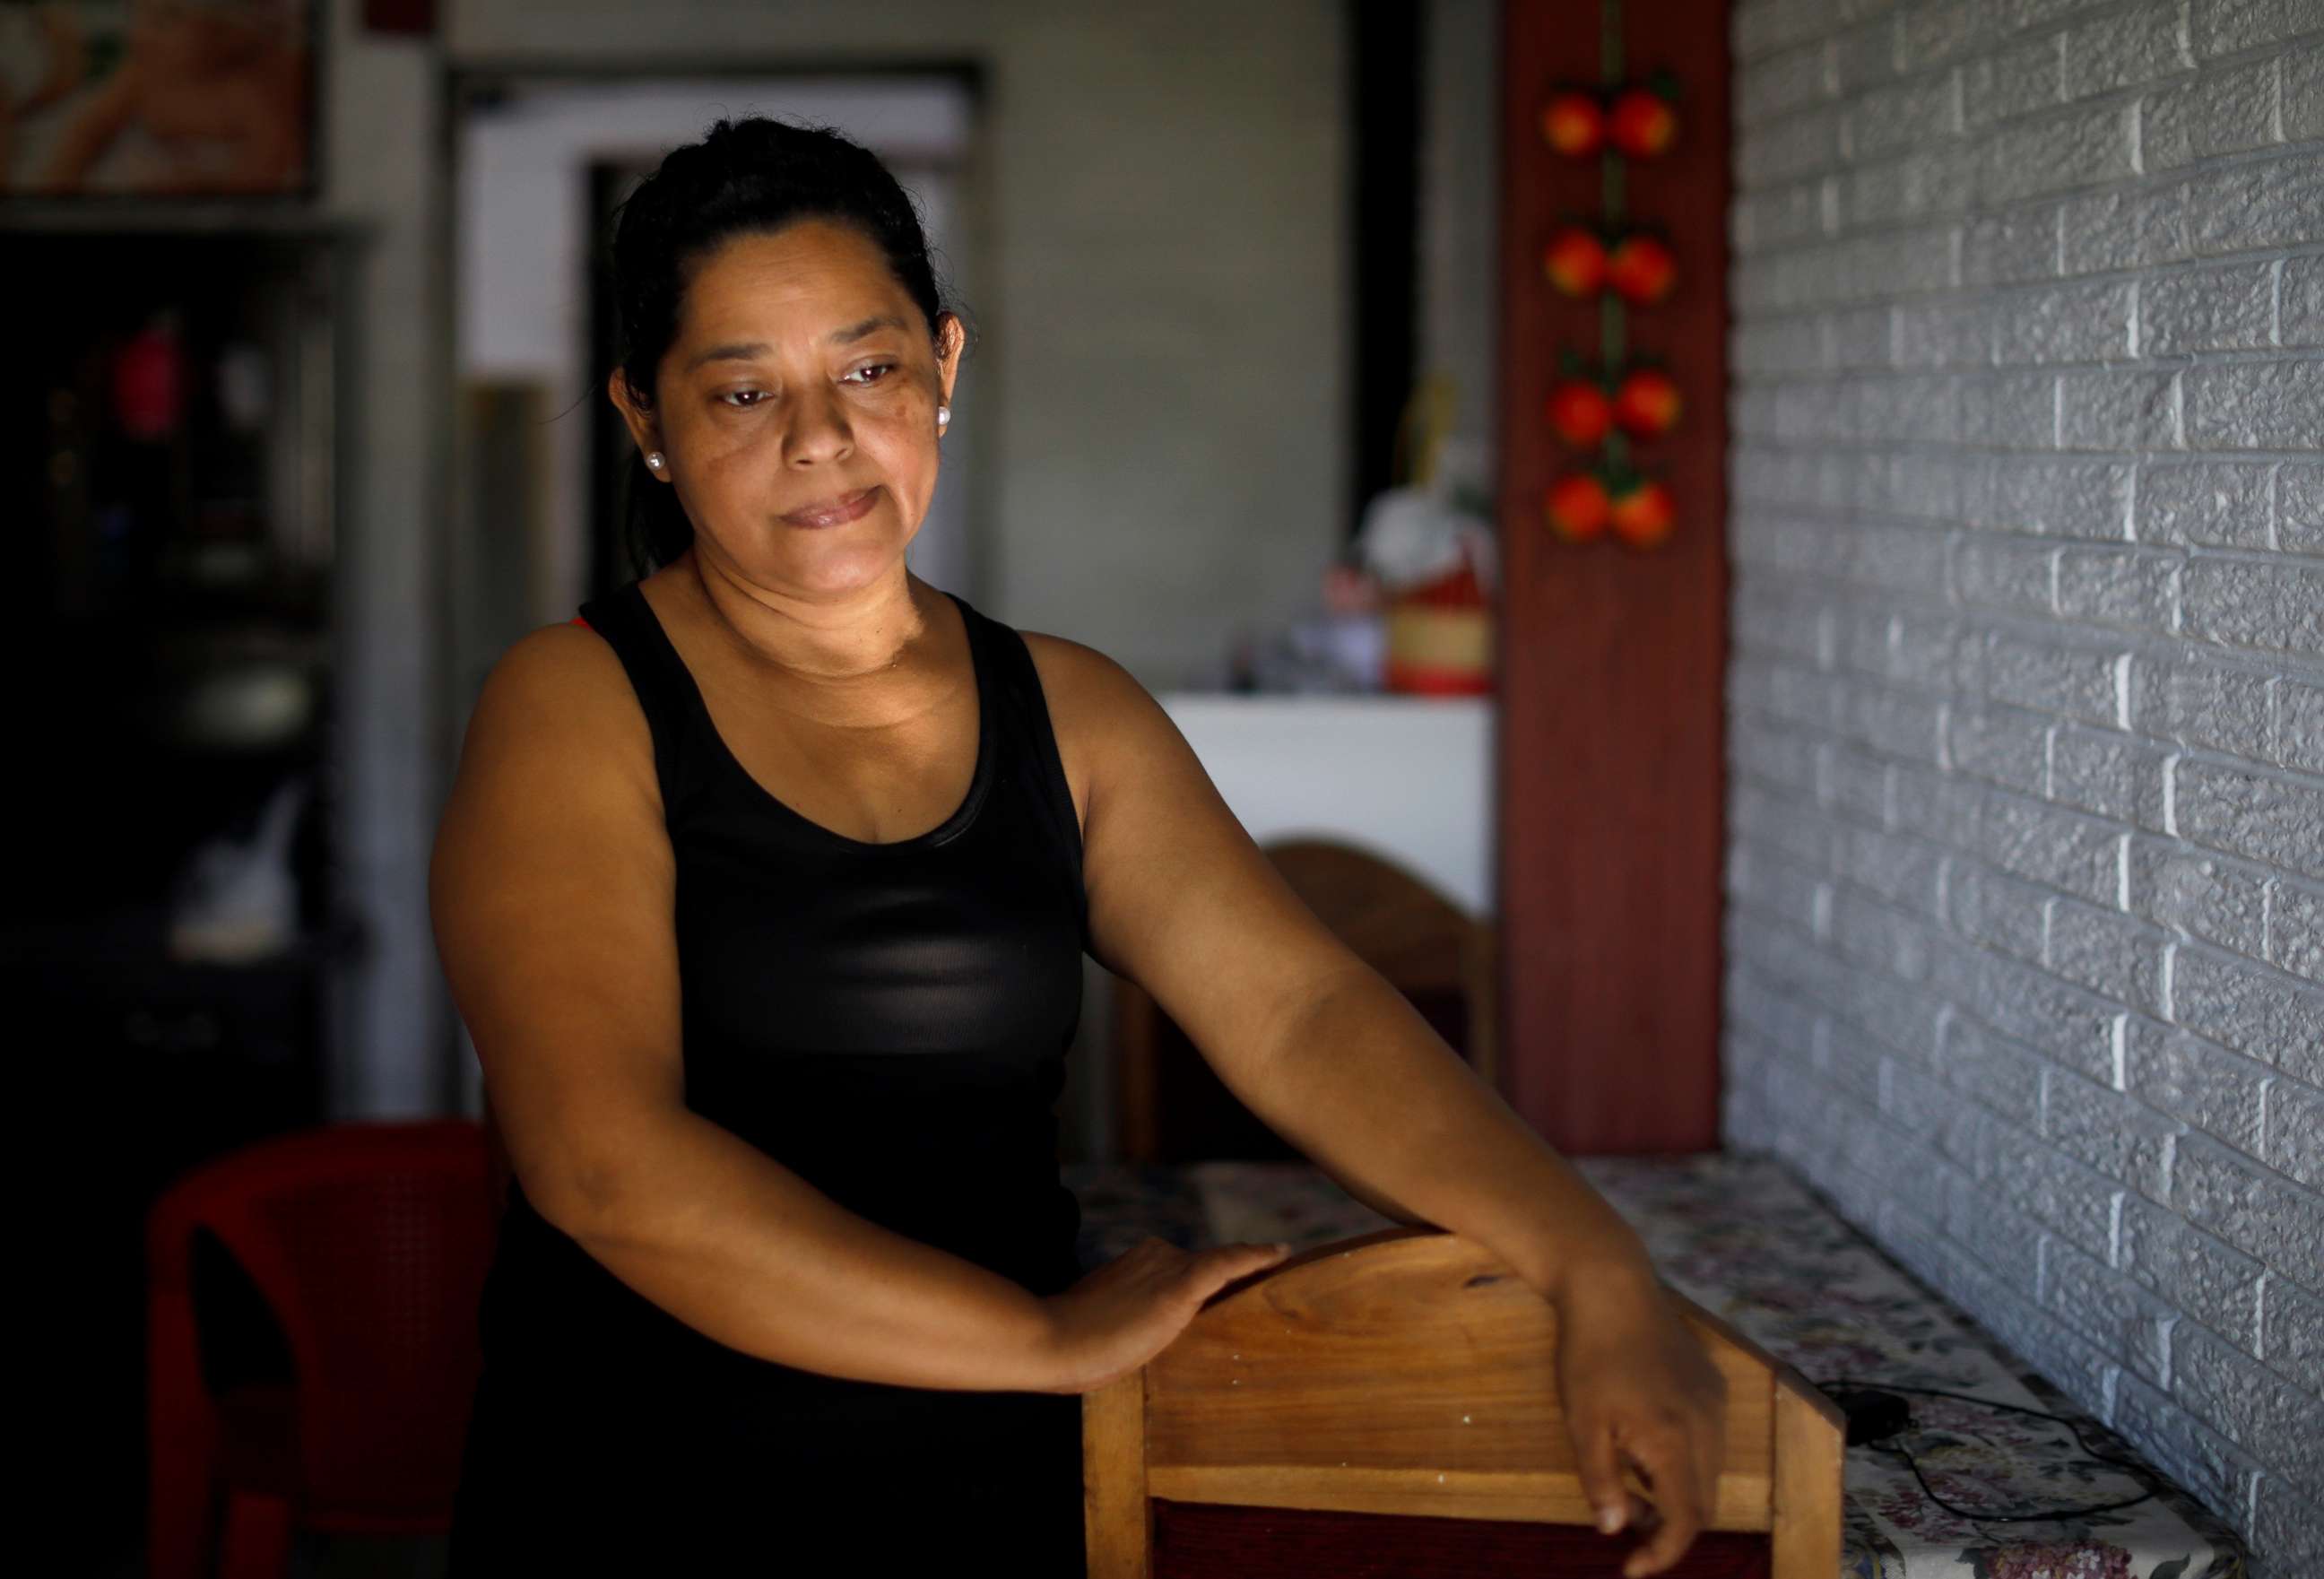 PHOTO:Rosa Ramirez, mother of Oscar Alberto Martinez Ramirez, a migrant who drowned in the Rio Grande River with his daughter Valeria during their journey to the U.S., is pictured at her house in the Altavista in San Martin, El Salvador, June 26, 2019.